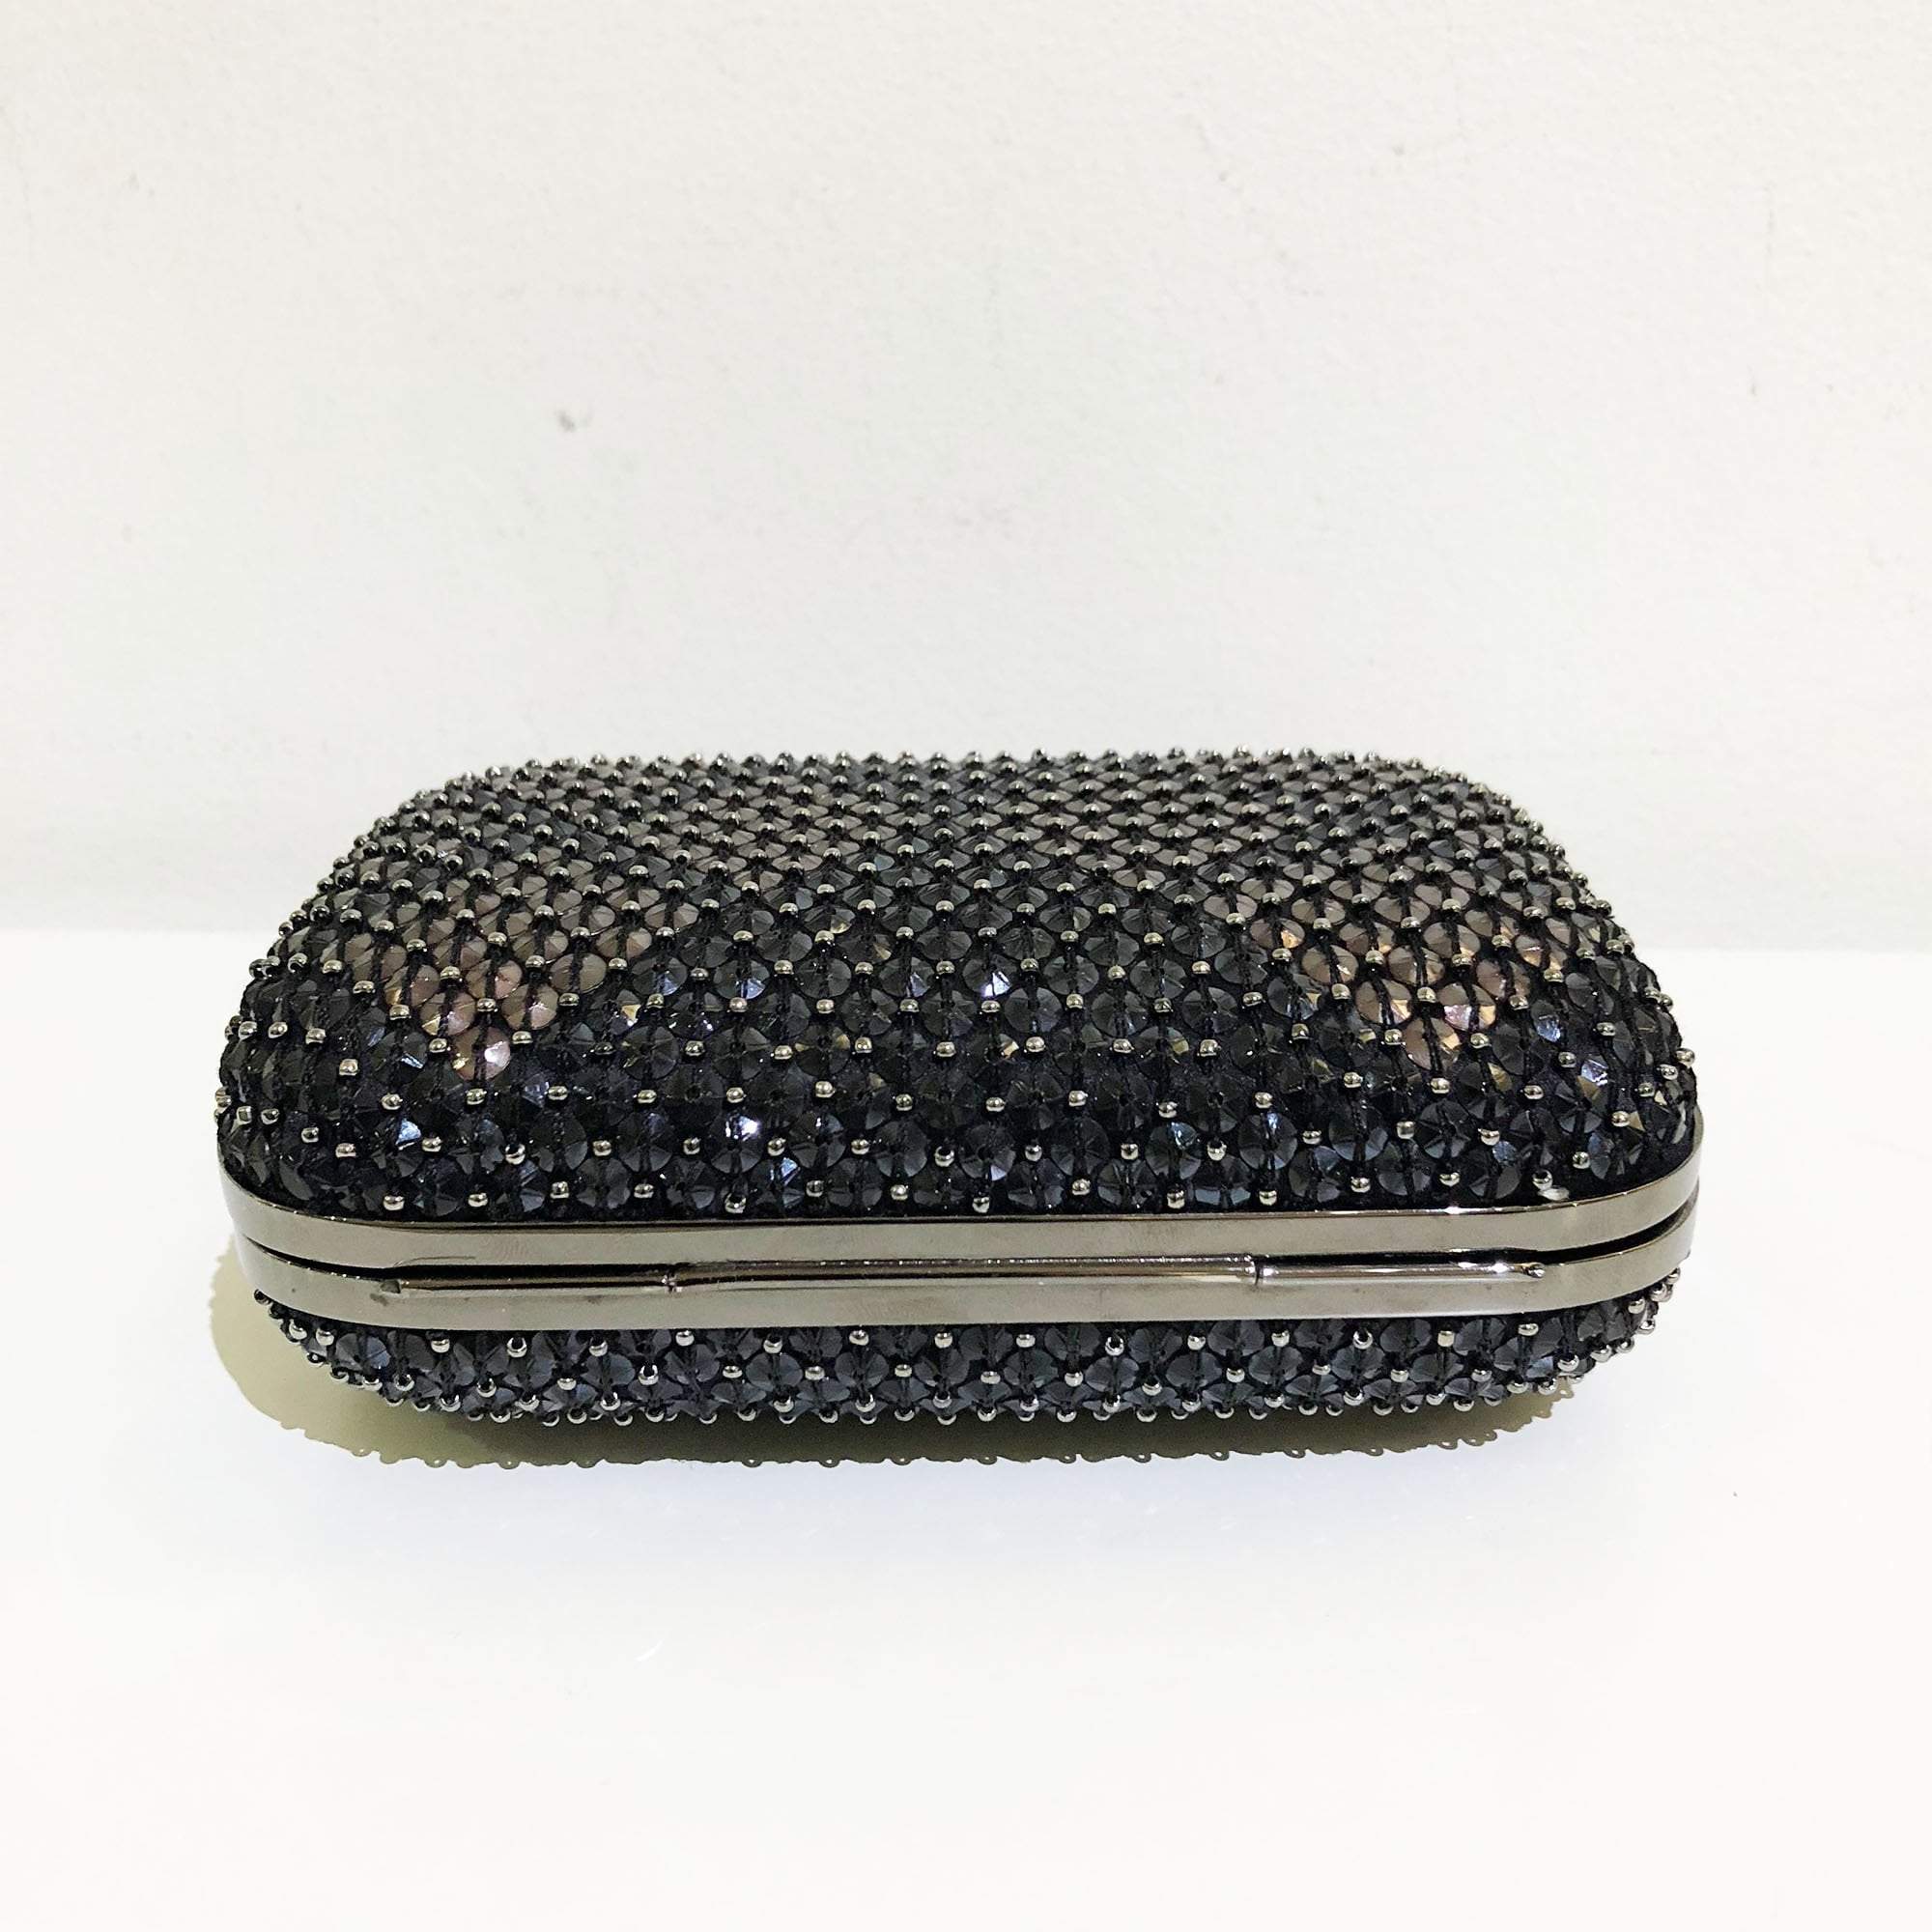 Gucci Studded Clutch Purse with Chain – Garderobe